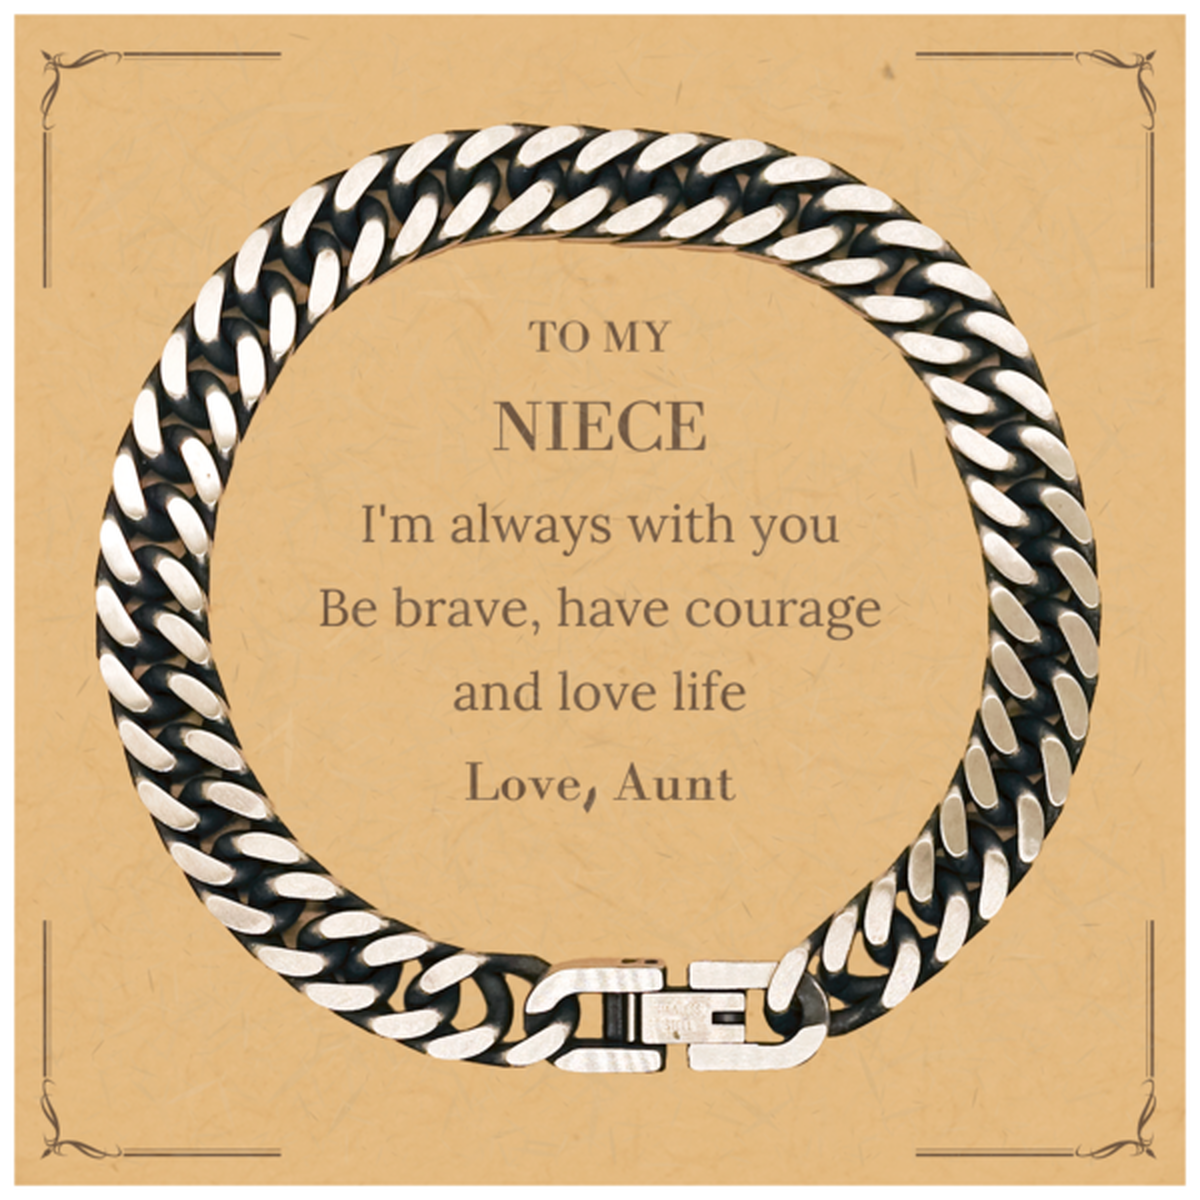 To My Niece Gifts from Aunt, Unique Cuban Link Chain Bracelet Inspirational Christmas Birthday Graduation Gifts for Niece I'm always with you. Be brave, have courage and love life. Love, Aunt